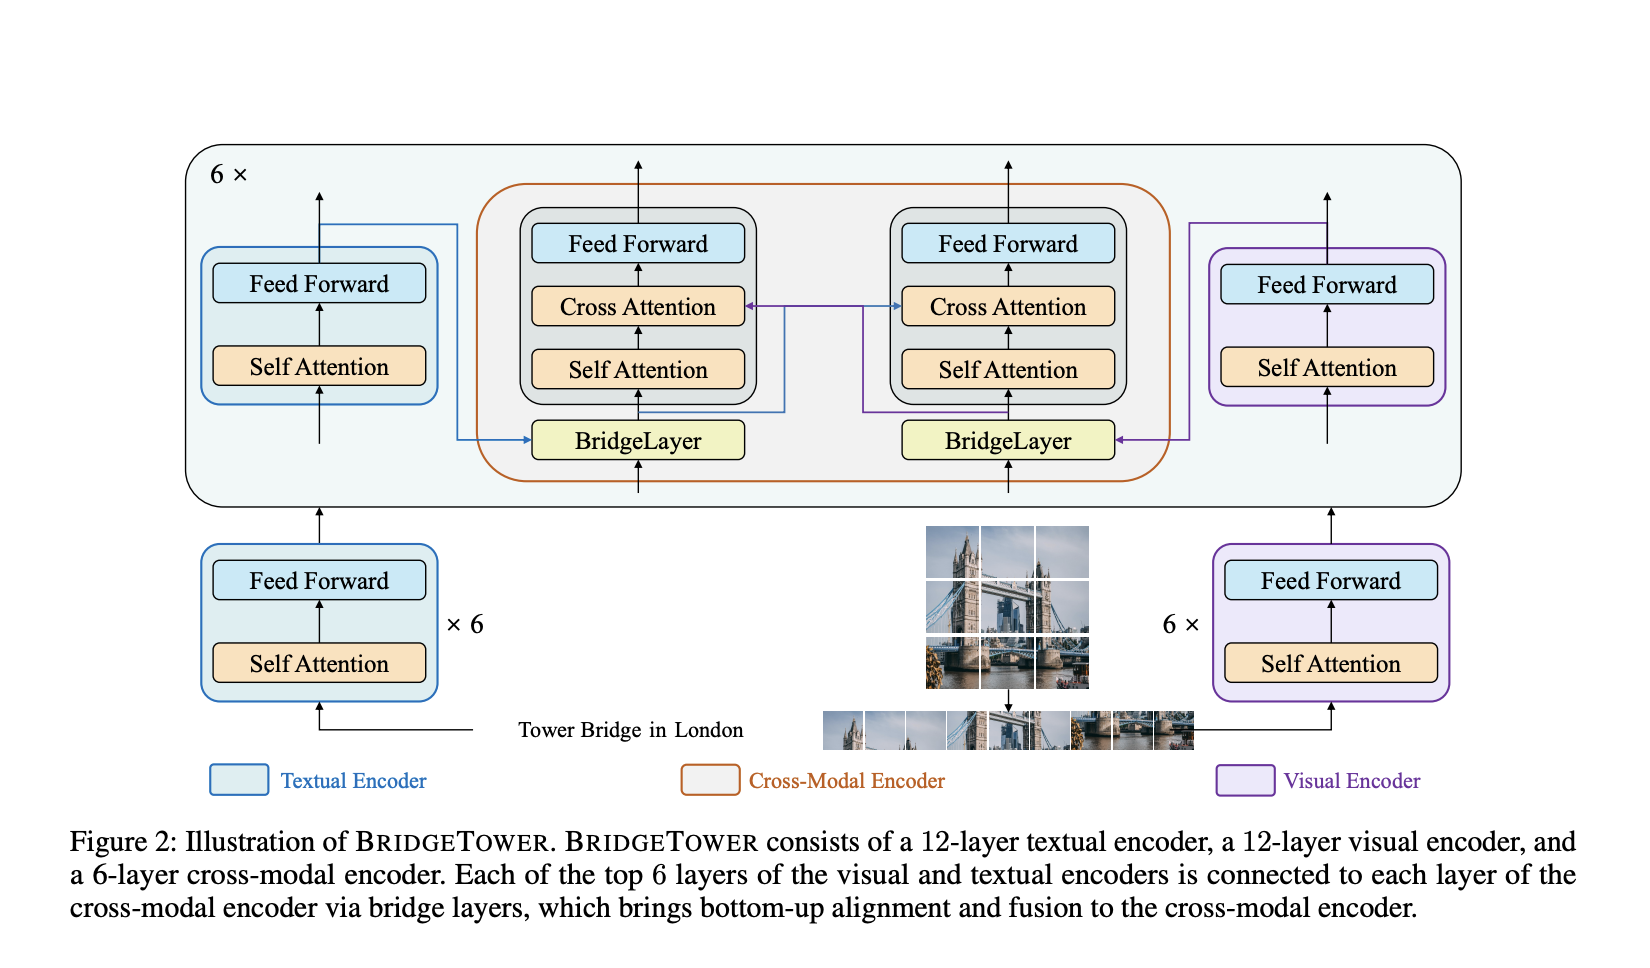  BRIDGETOWER: A Novel Transformer-based Vision-Language VL Model that Takes Full Advantage of the Features of Different Layers in Pre-Trained Uni-Modal Encoders